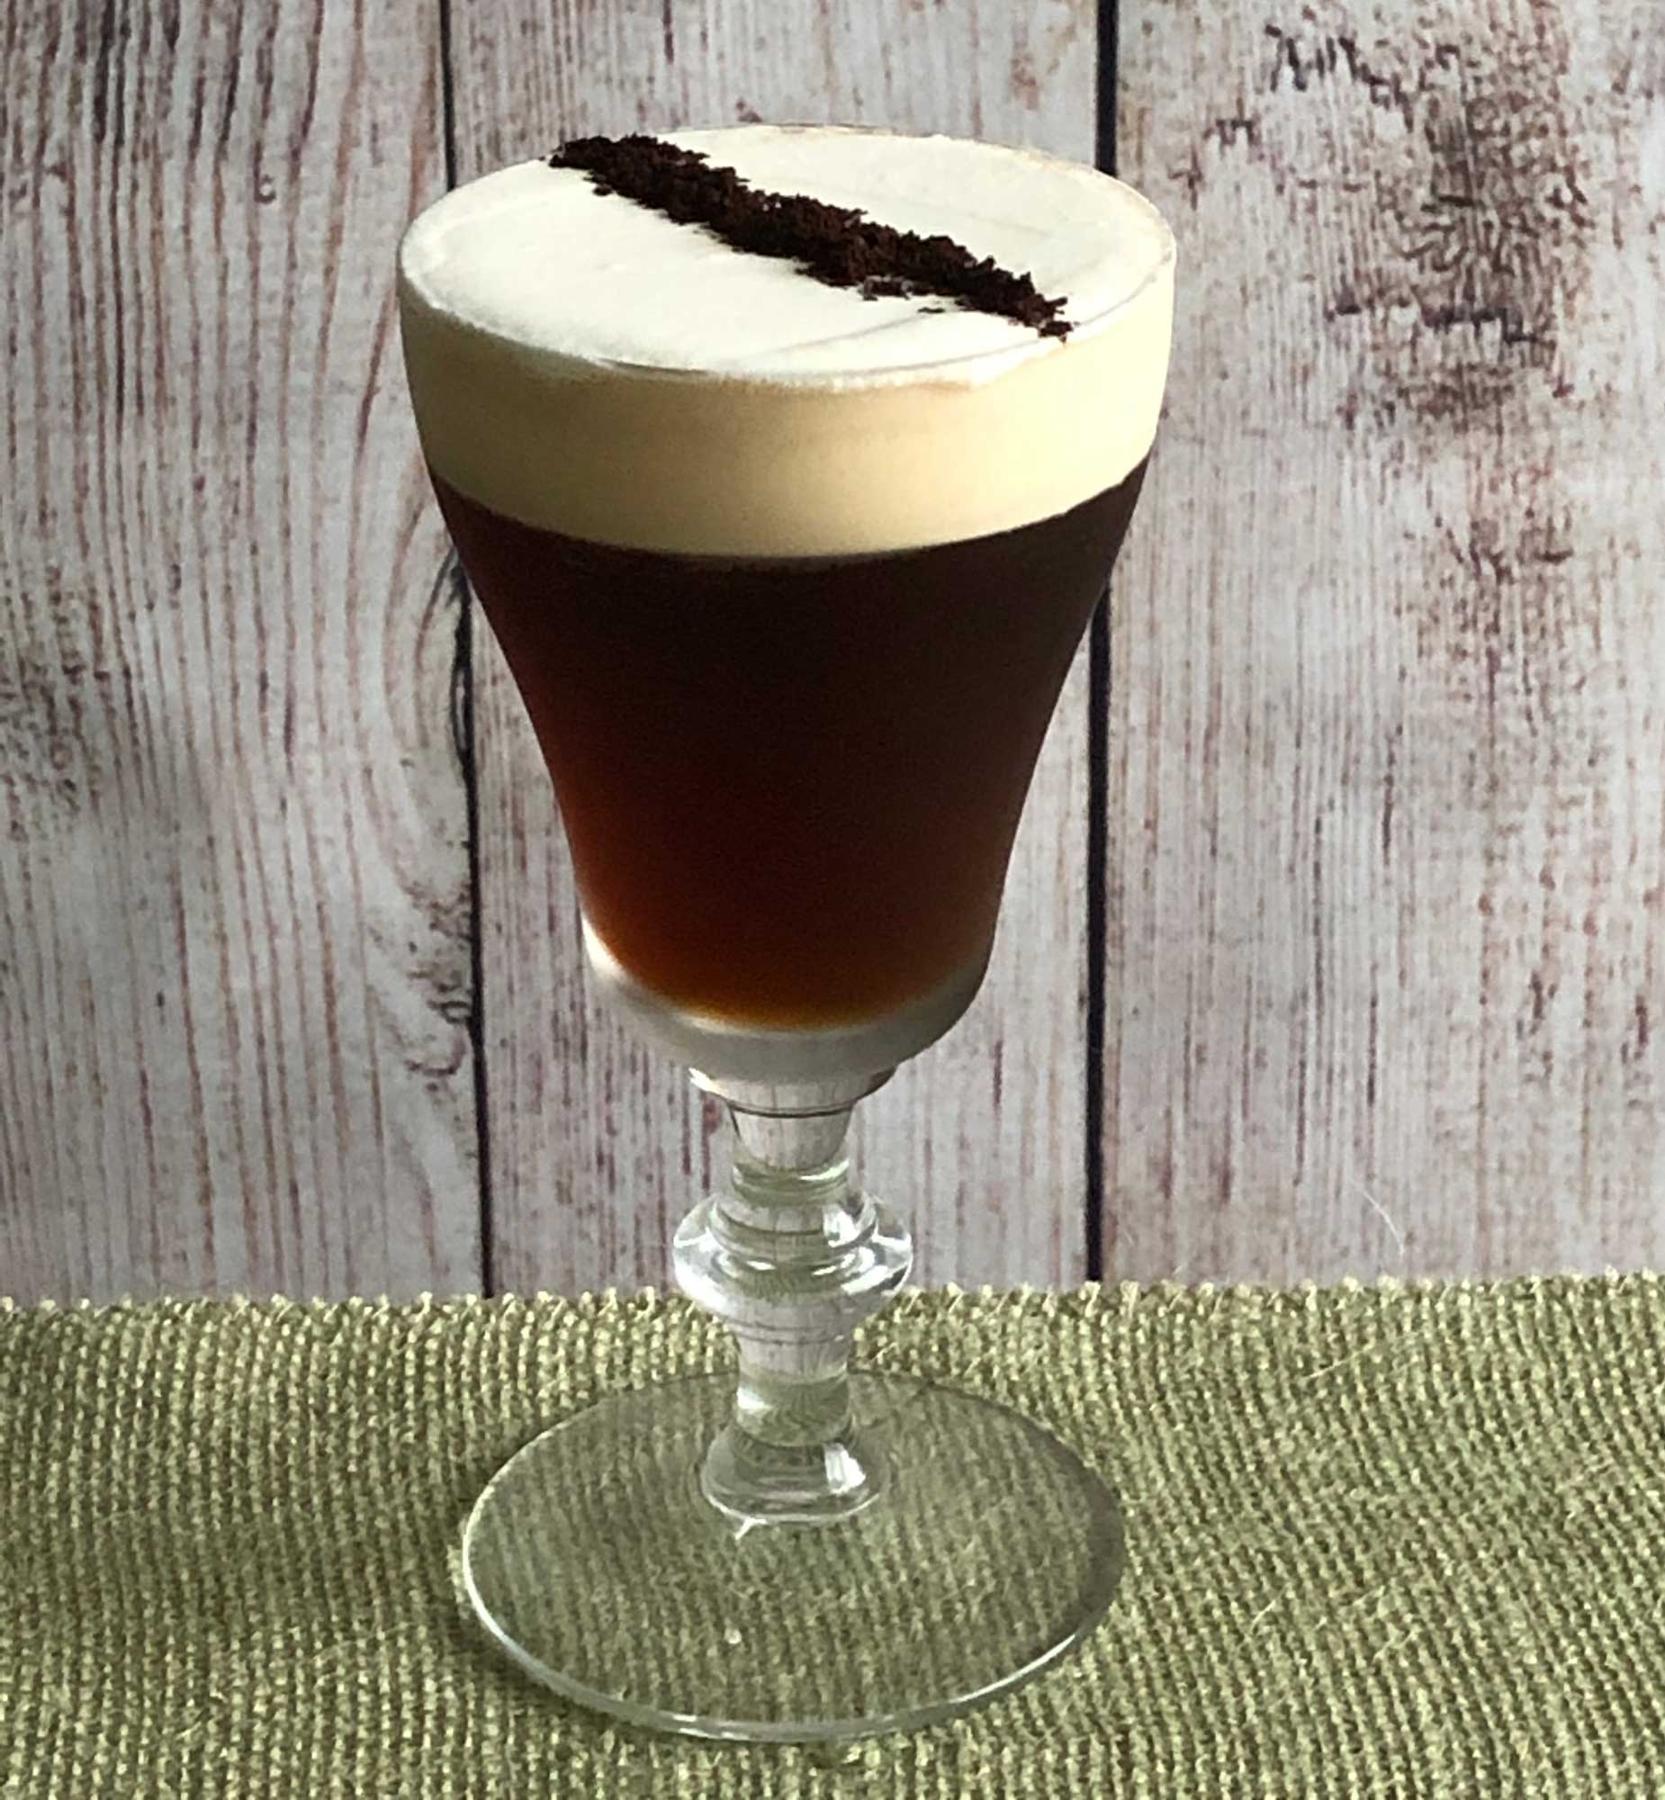 An example of the Freddo Corretto, the mixed drink (drink), by Salt Air, Venice, CA, featuring Cardamaro Vino Amaro, cold brew coffee, raw sugar syrup, Angostura bitters, whipped cream, and coffee grinds; photo by Lee Edwards